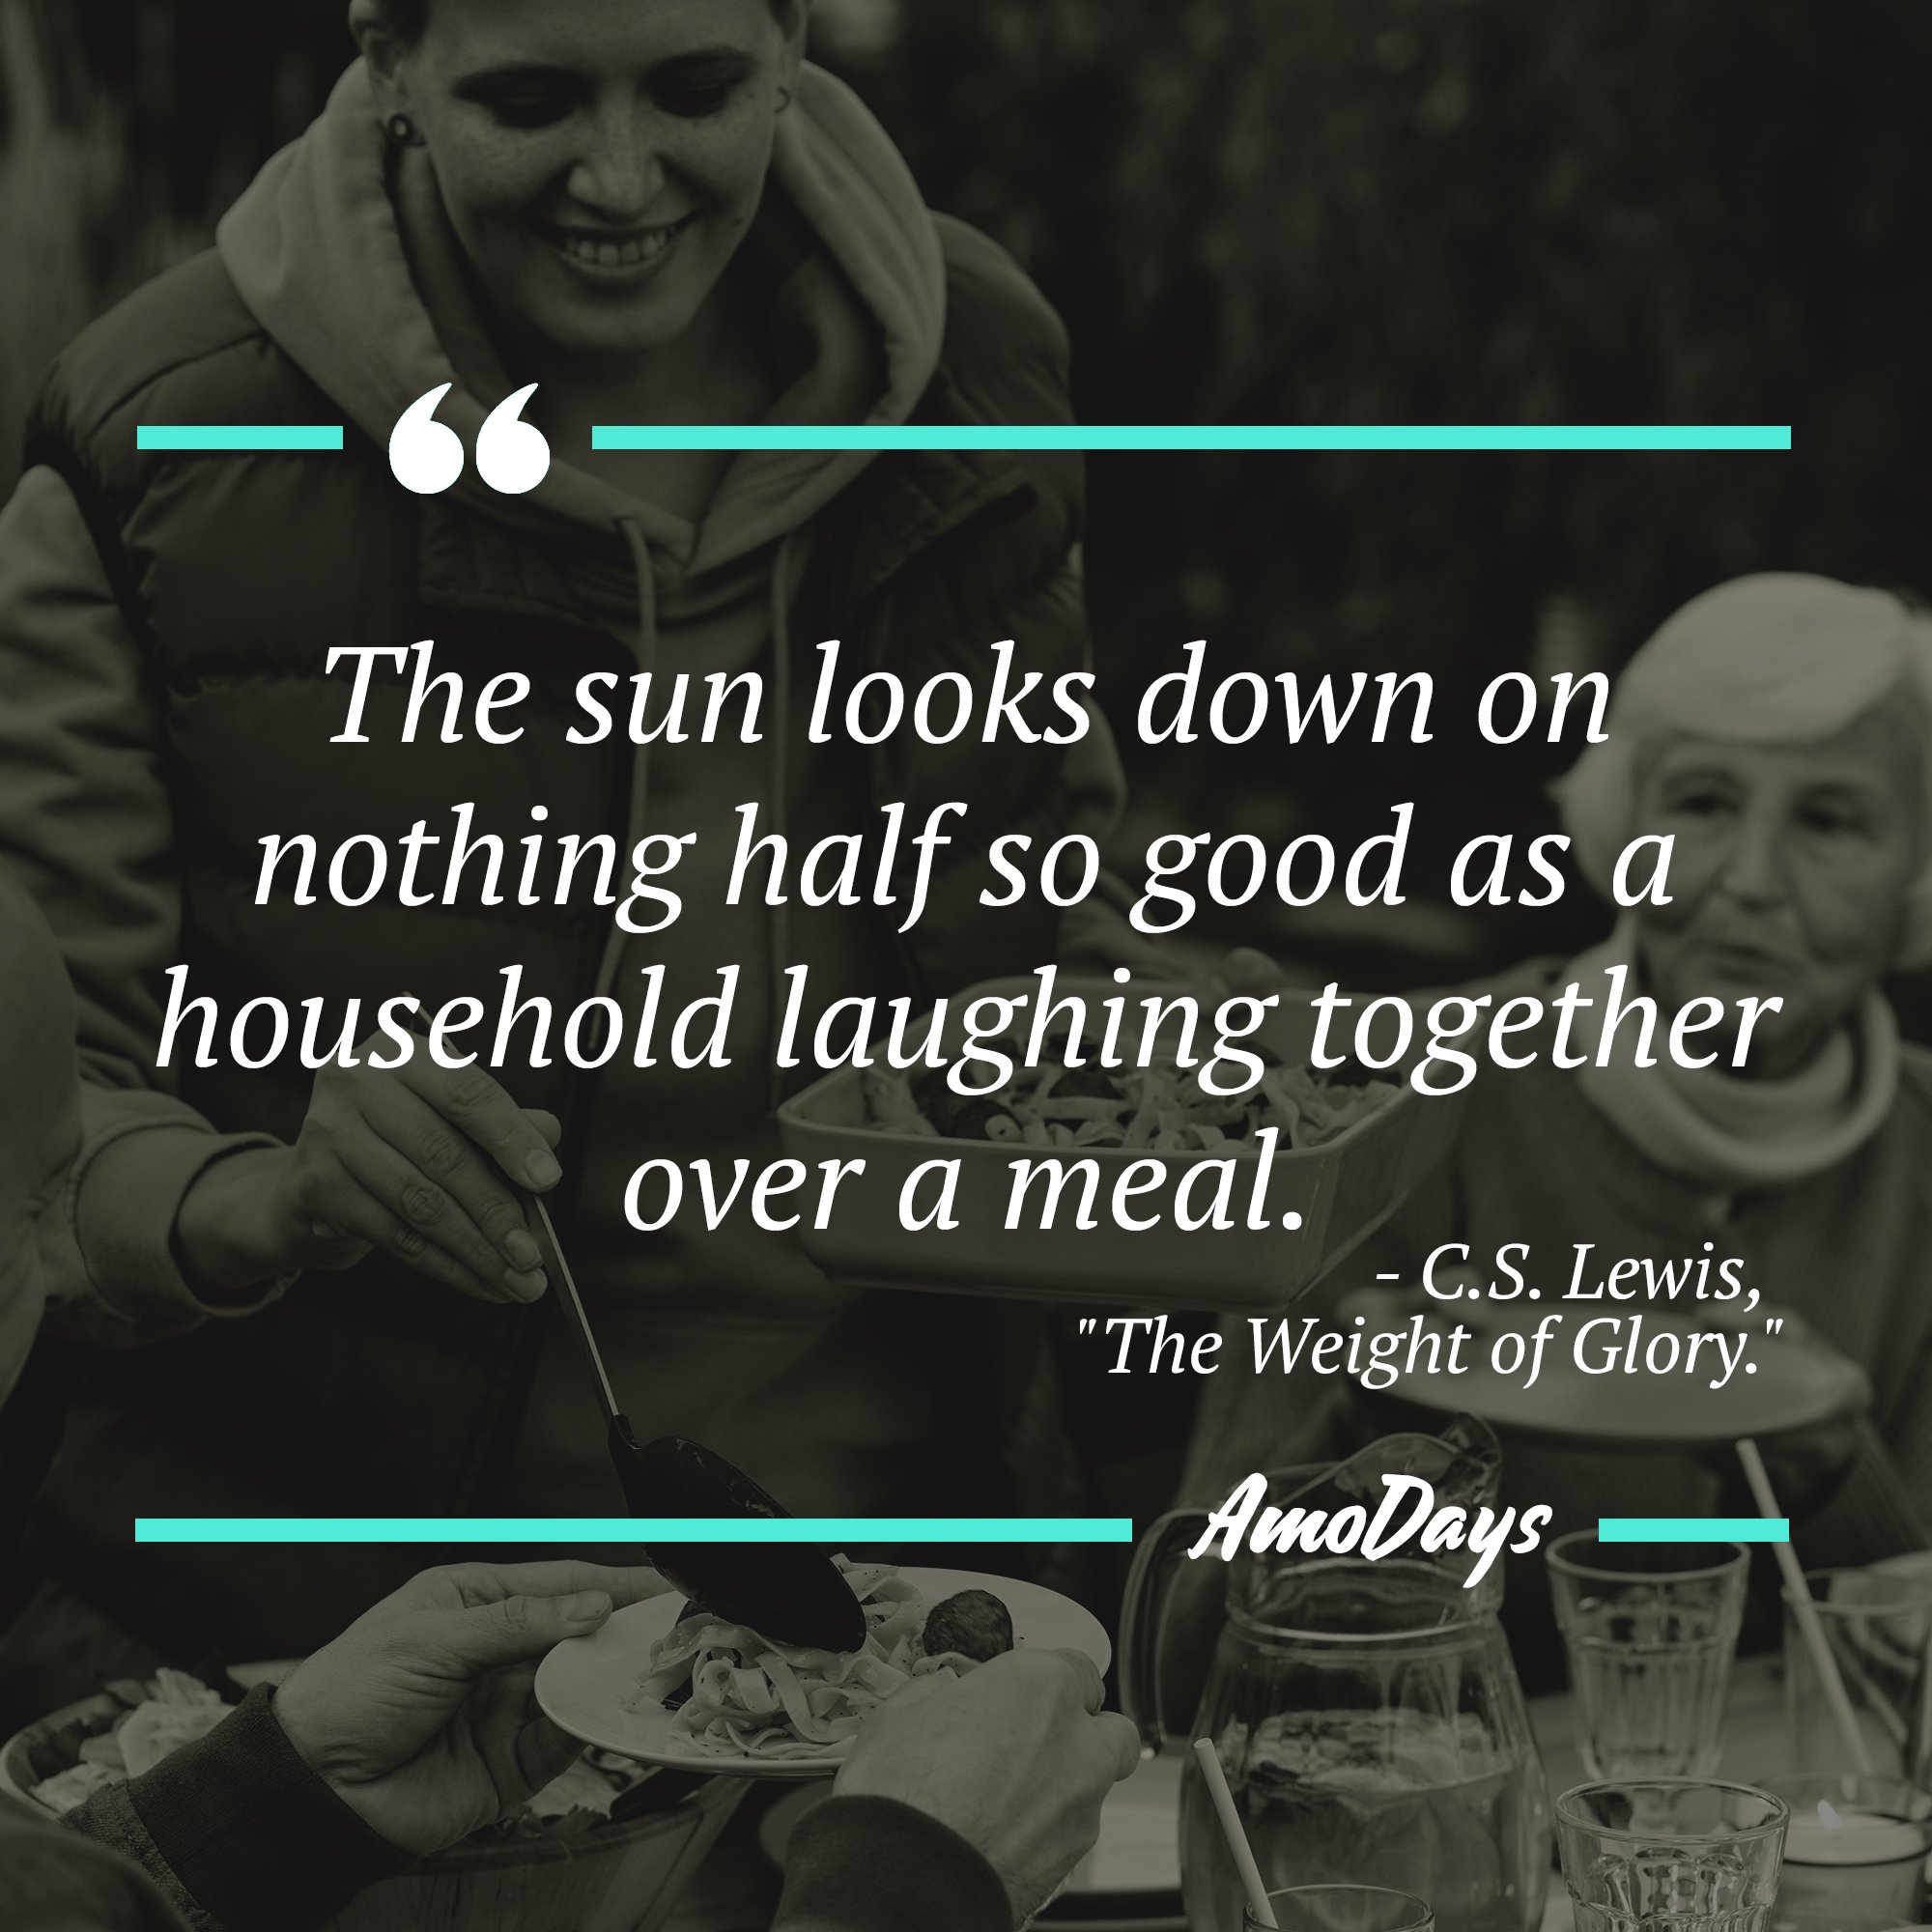 C.S. Lewis's quote "The sun looks down on nothing half so good as a household laughing together over a meal."  | Image: AmoDays